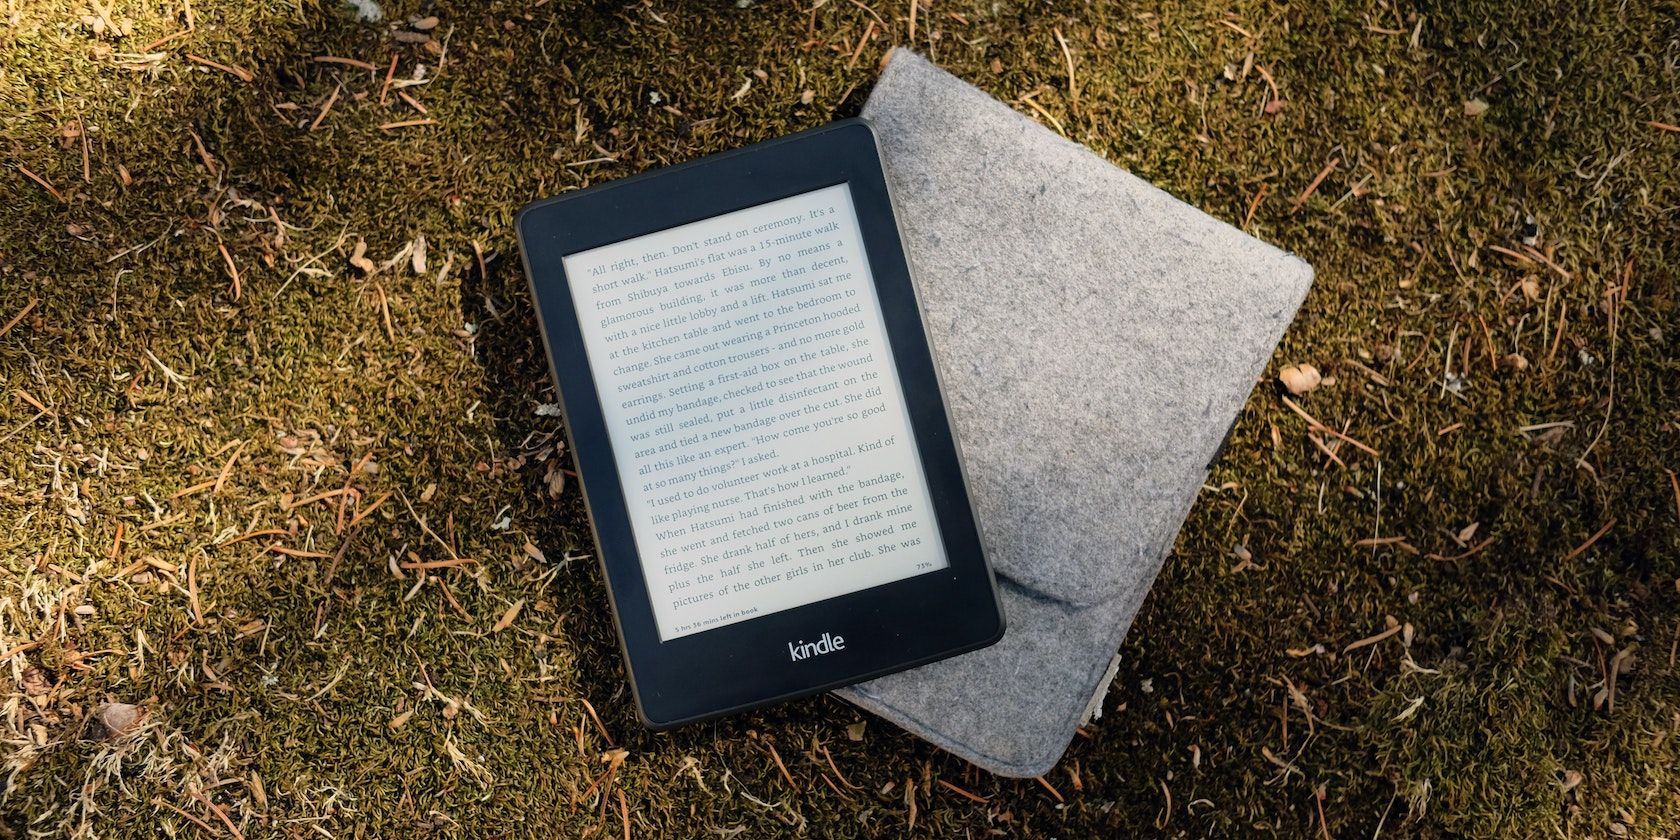 A Kindle on top of a gray flip cover case on grass.